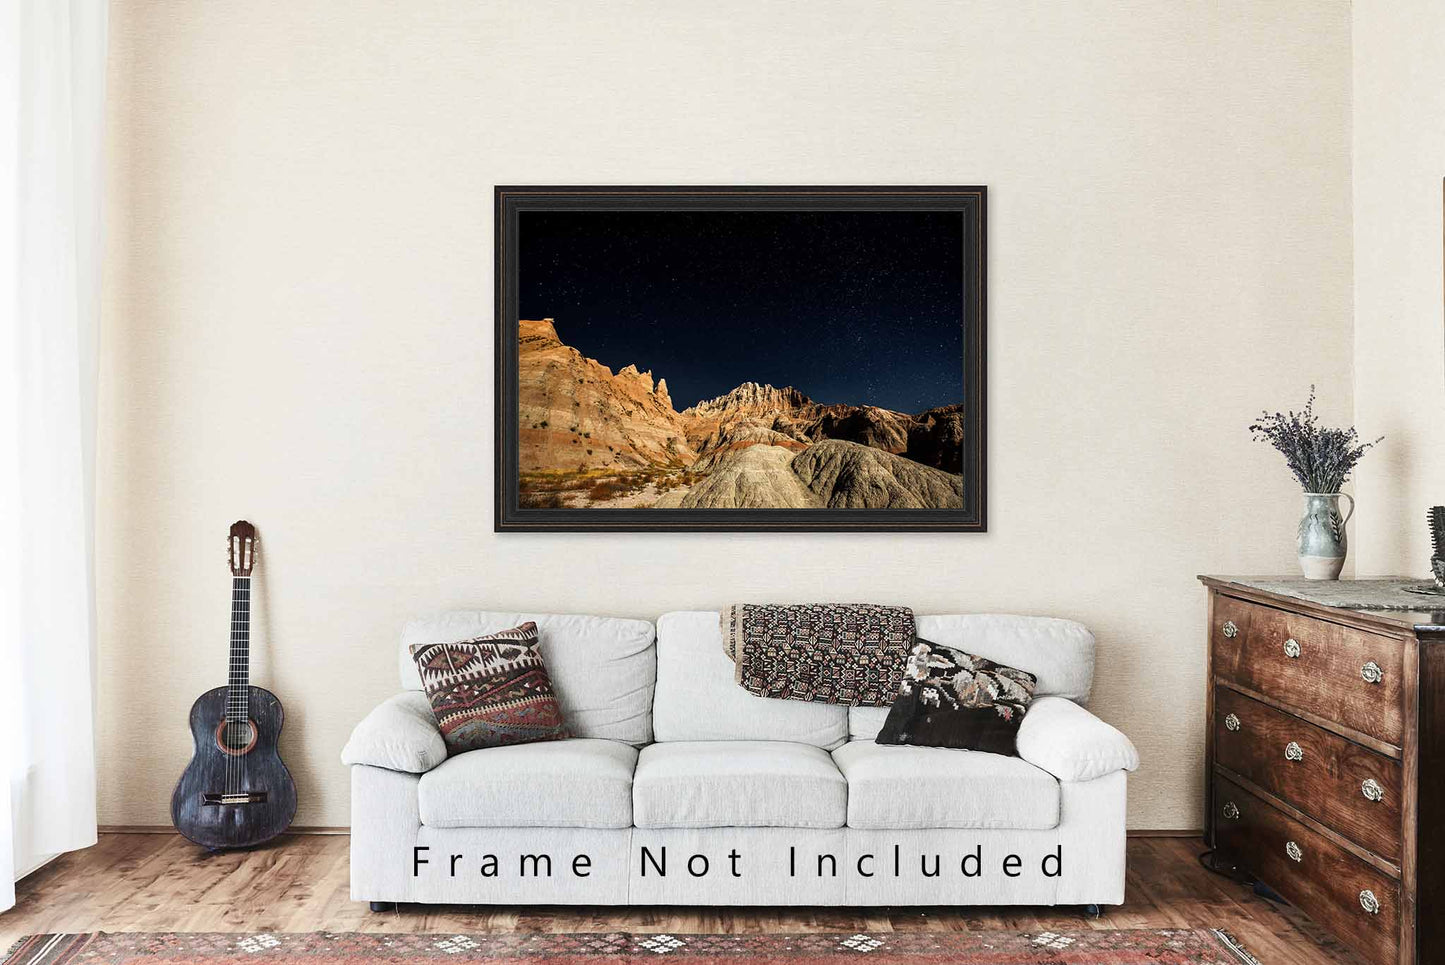 Great Plains Photography Print (Not Framed) Picture of Starry Night Sky Over Pinnacles in Badlands National Park South Dakota Western Wall Art Nature Decor